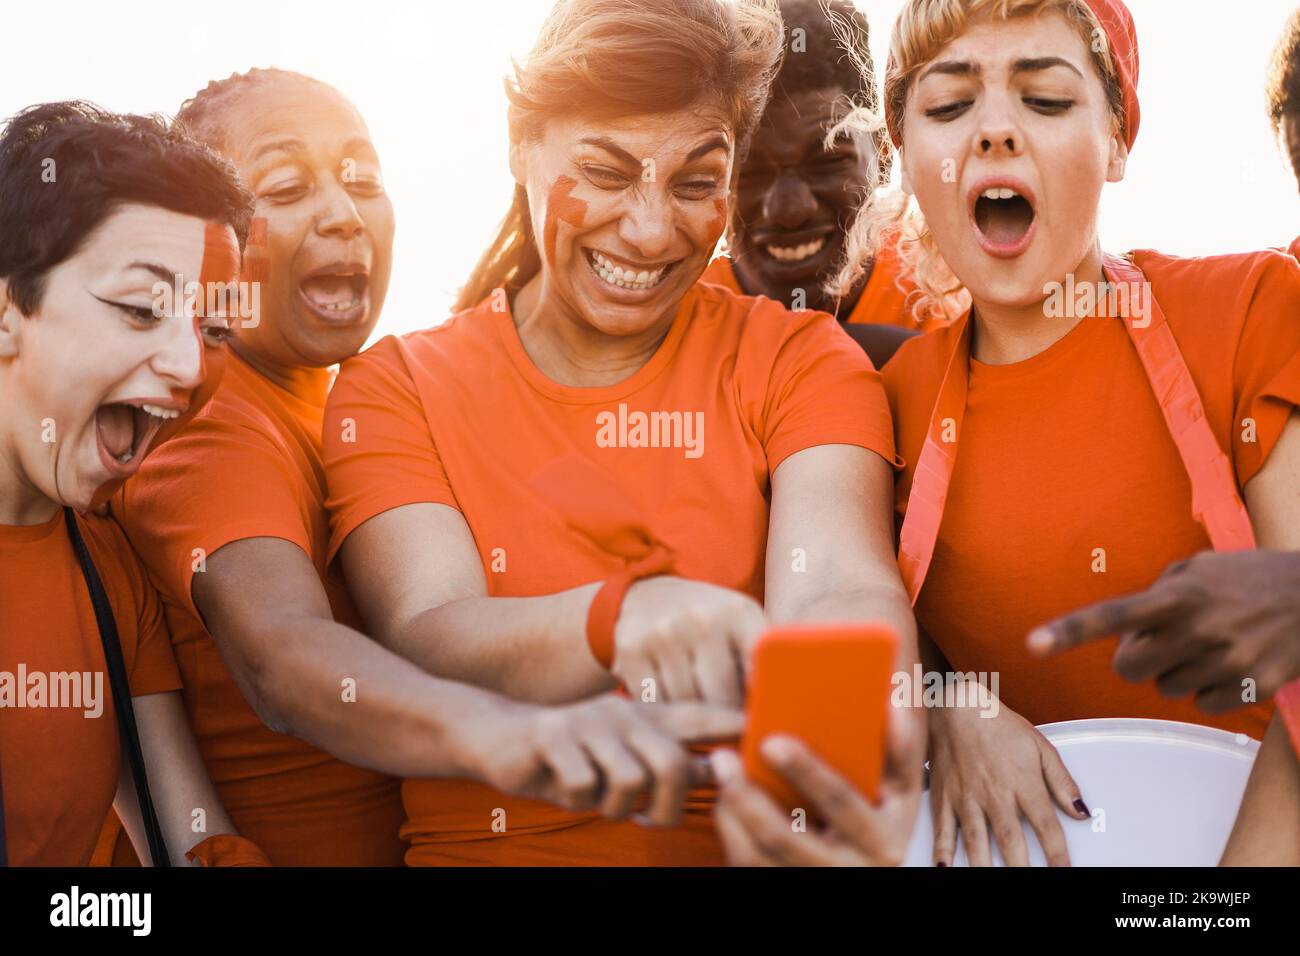 Orange sport supporters watching football game on mobile phone - Focus on center woman face Stock Photo